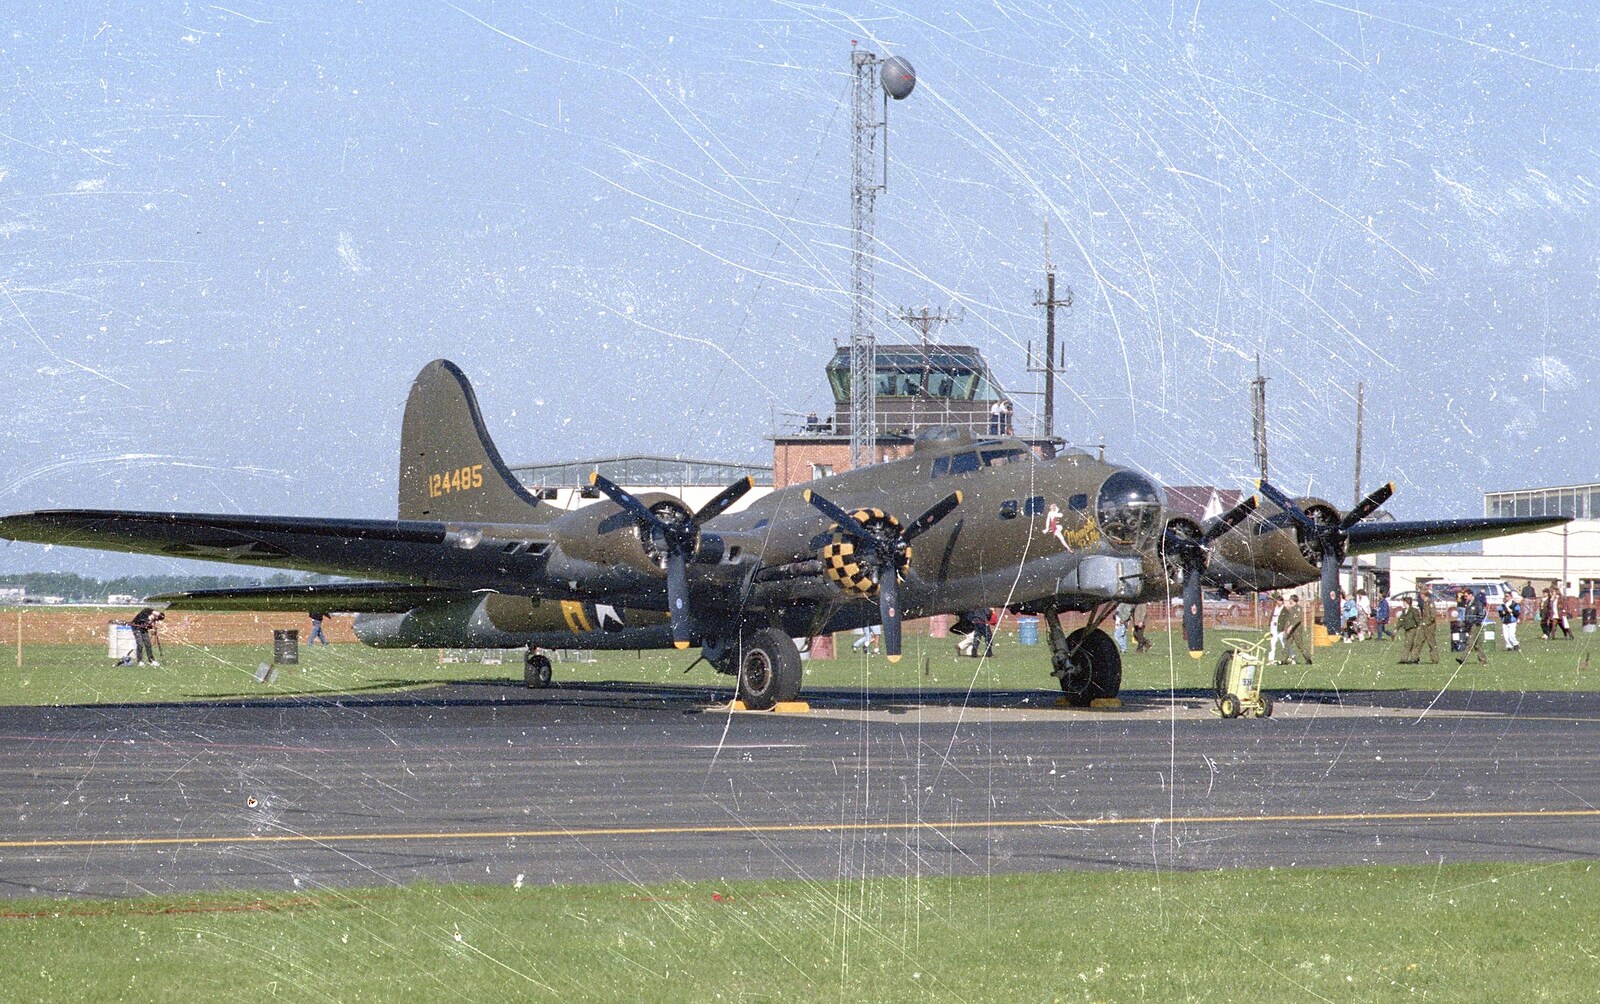 Sally B on the stand from The Mildenhall Air Fete, Mildenhall, Suffolk - 29th May 1994